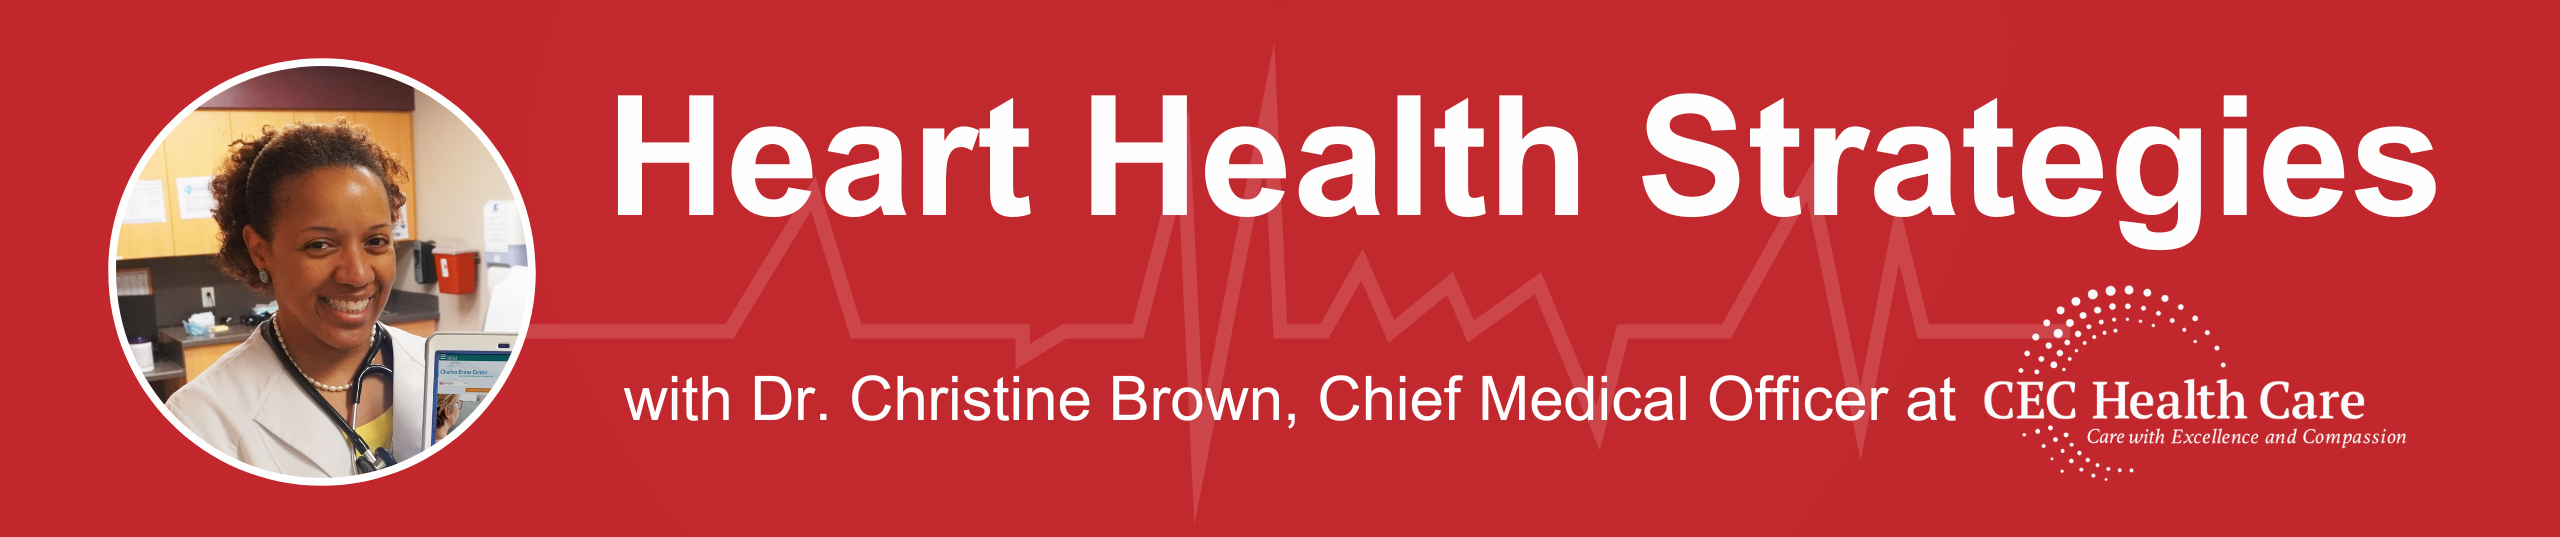 Photograph of a medical provider in an exam room. The headline is Heart Health Strategies with Dr. Brown, Chief Medical Officer at CEC Health Care